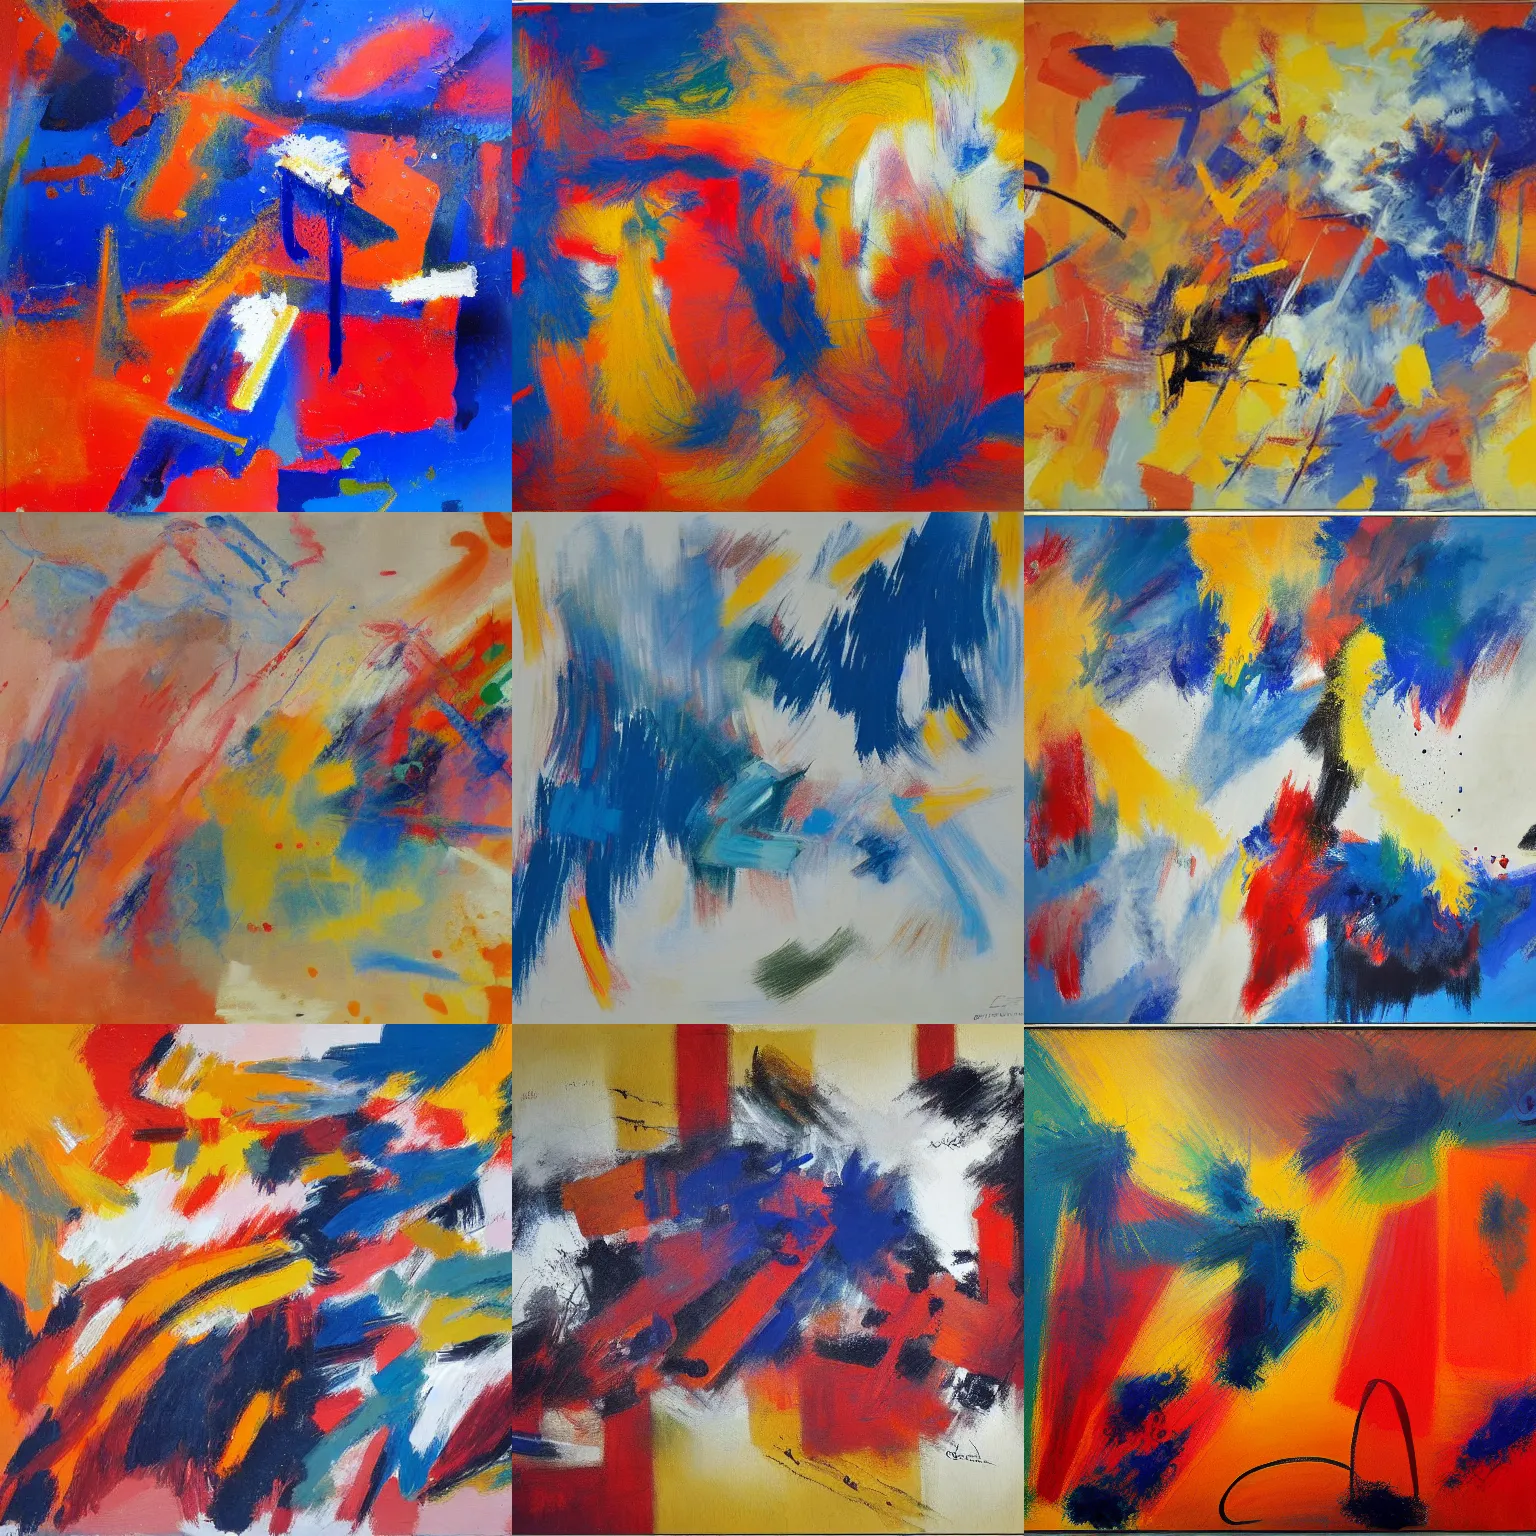 Prompt: painting by georges mathieu, tachisme, lyrical abstraction, action painting